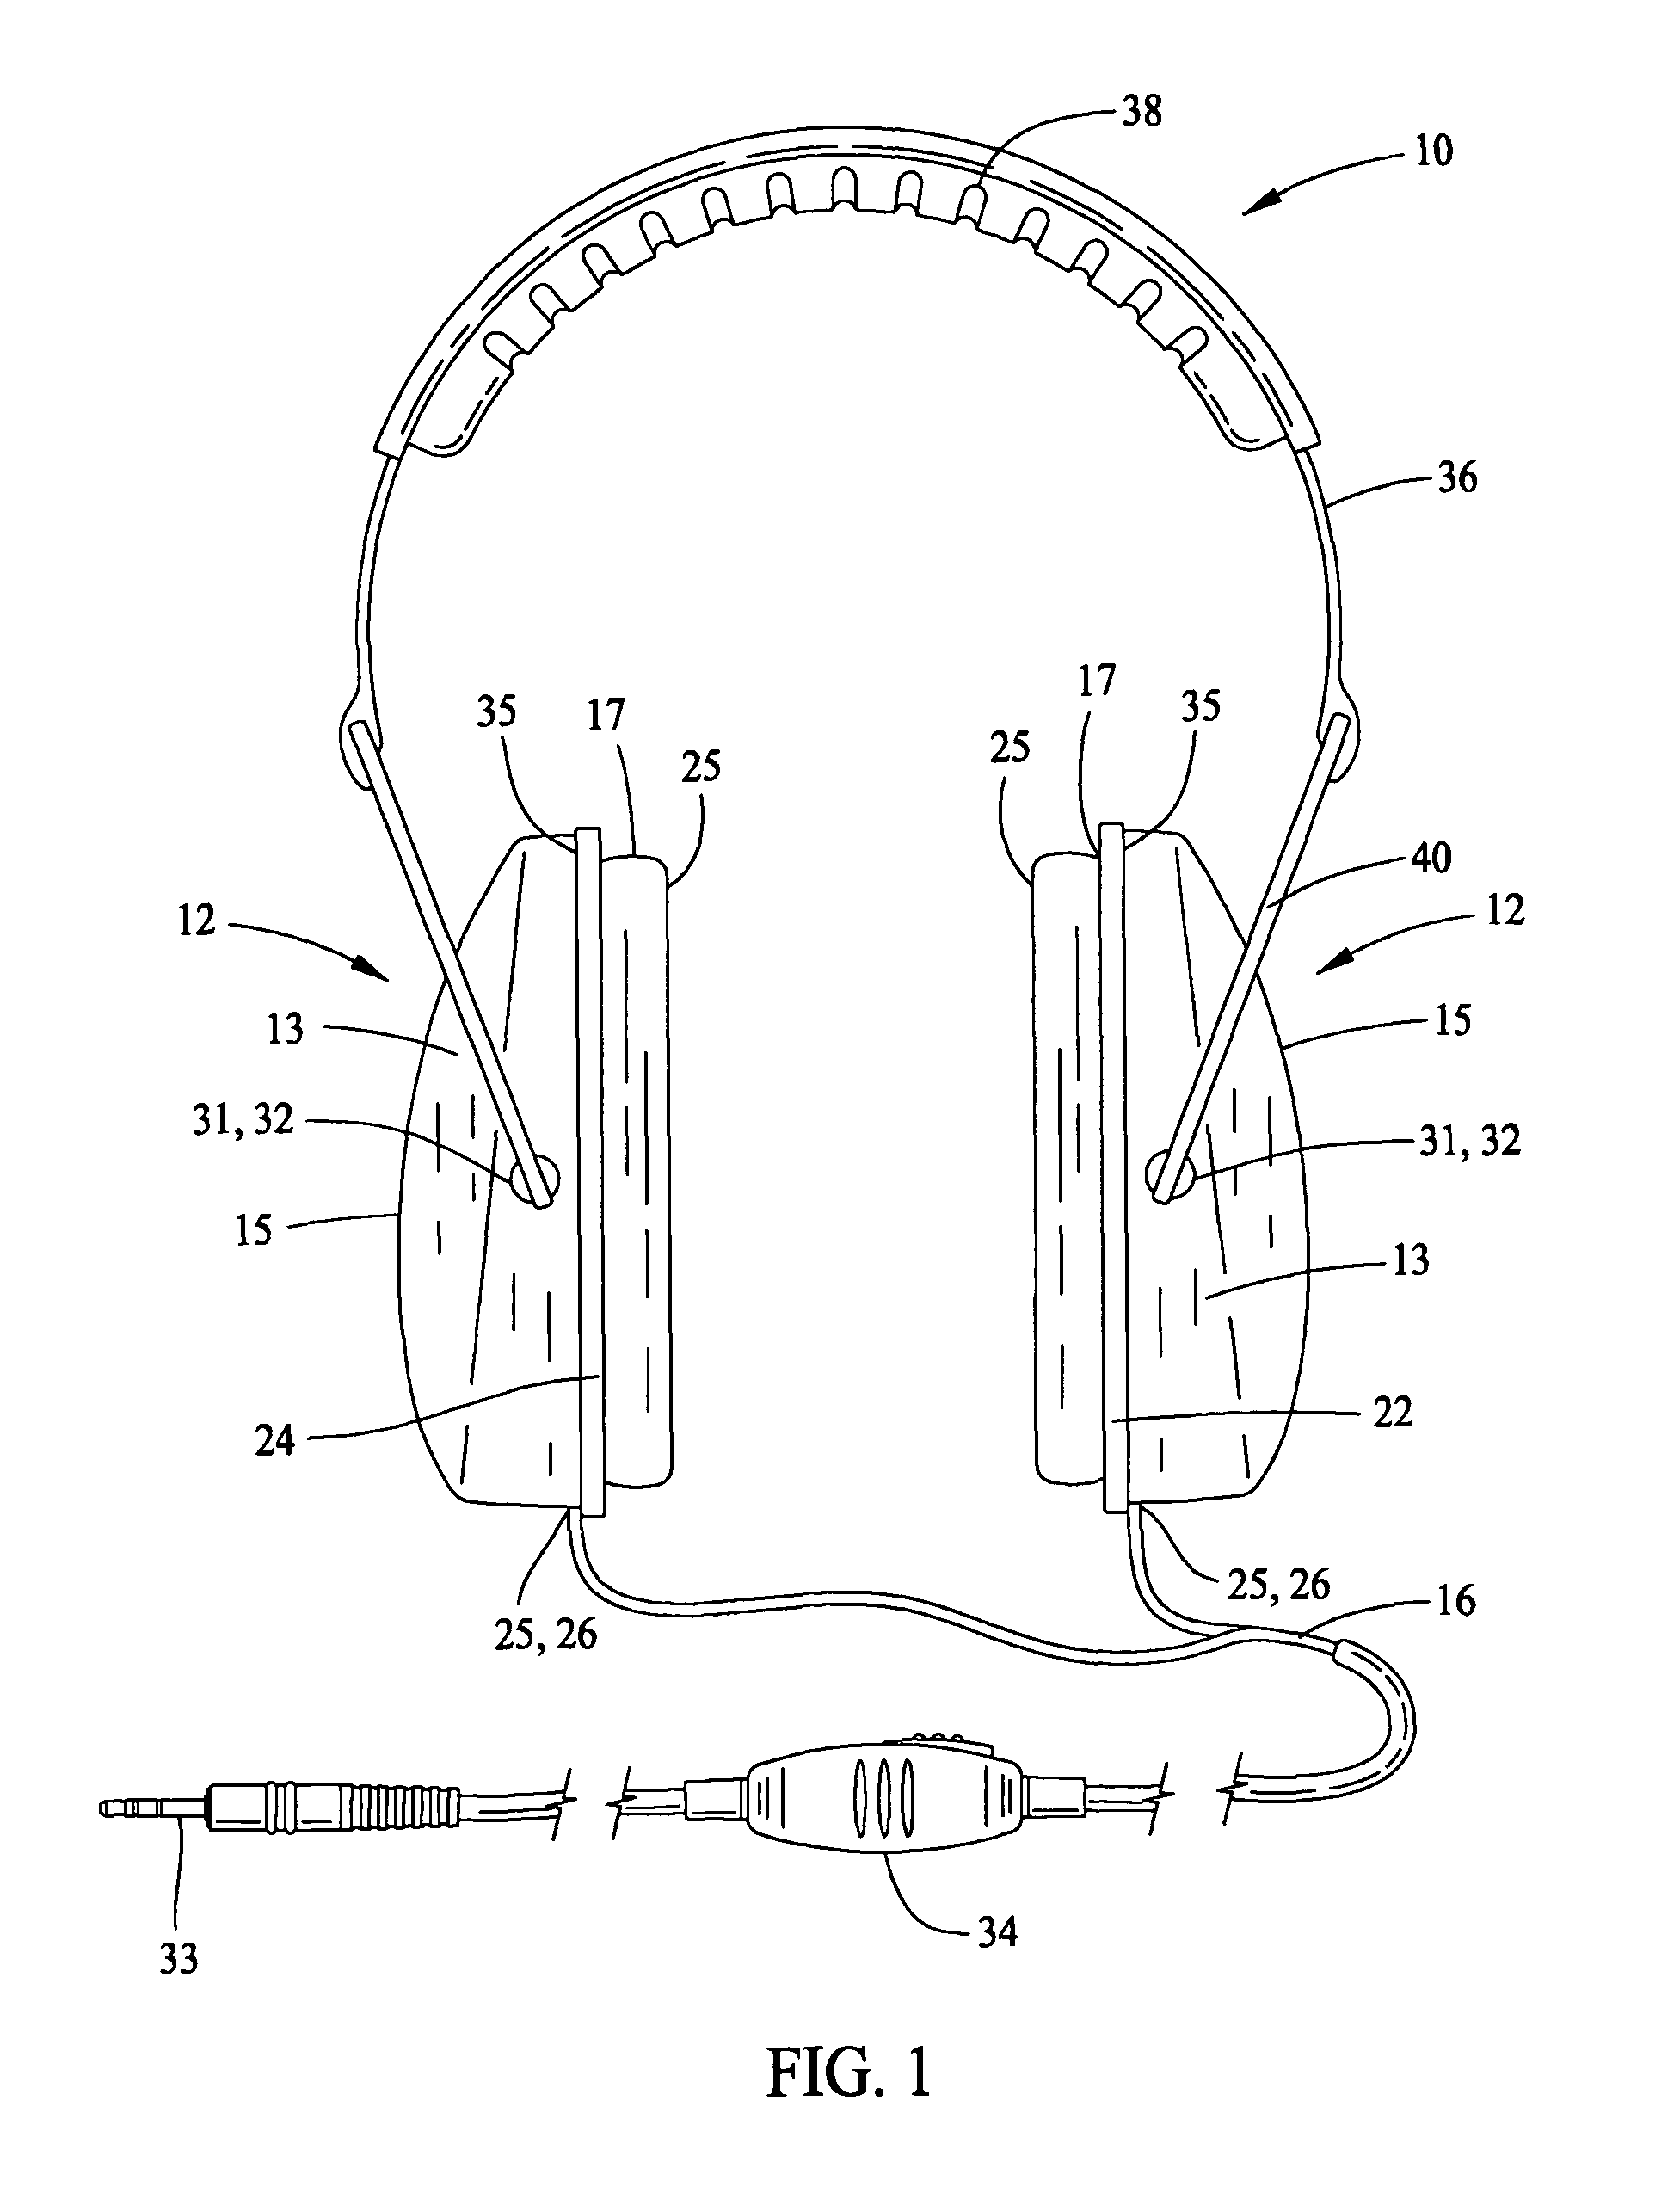 Ambient noise isolation audio headphones having a layered dampening structure